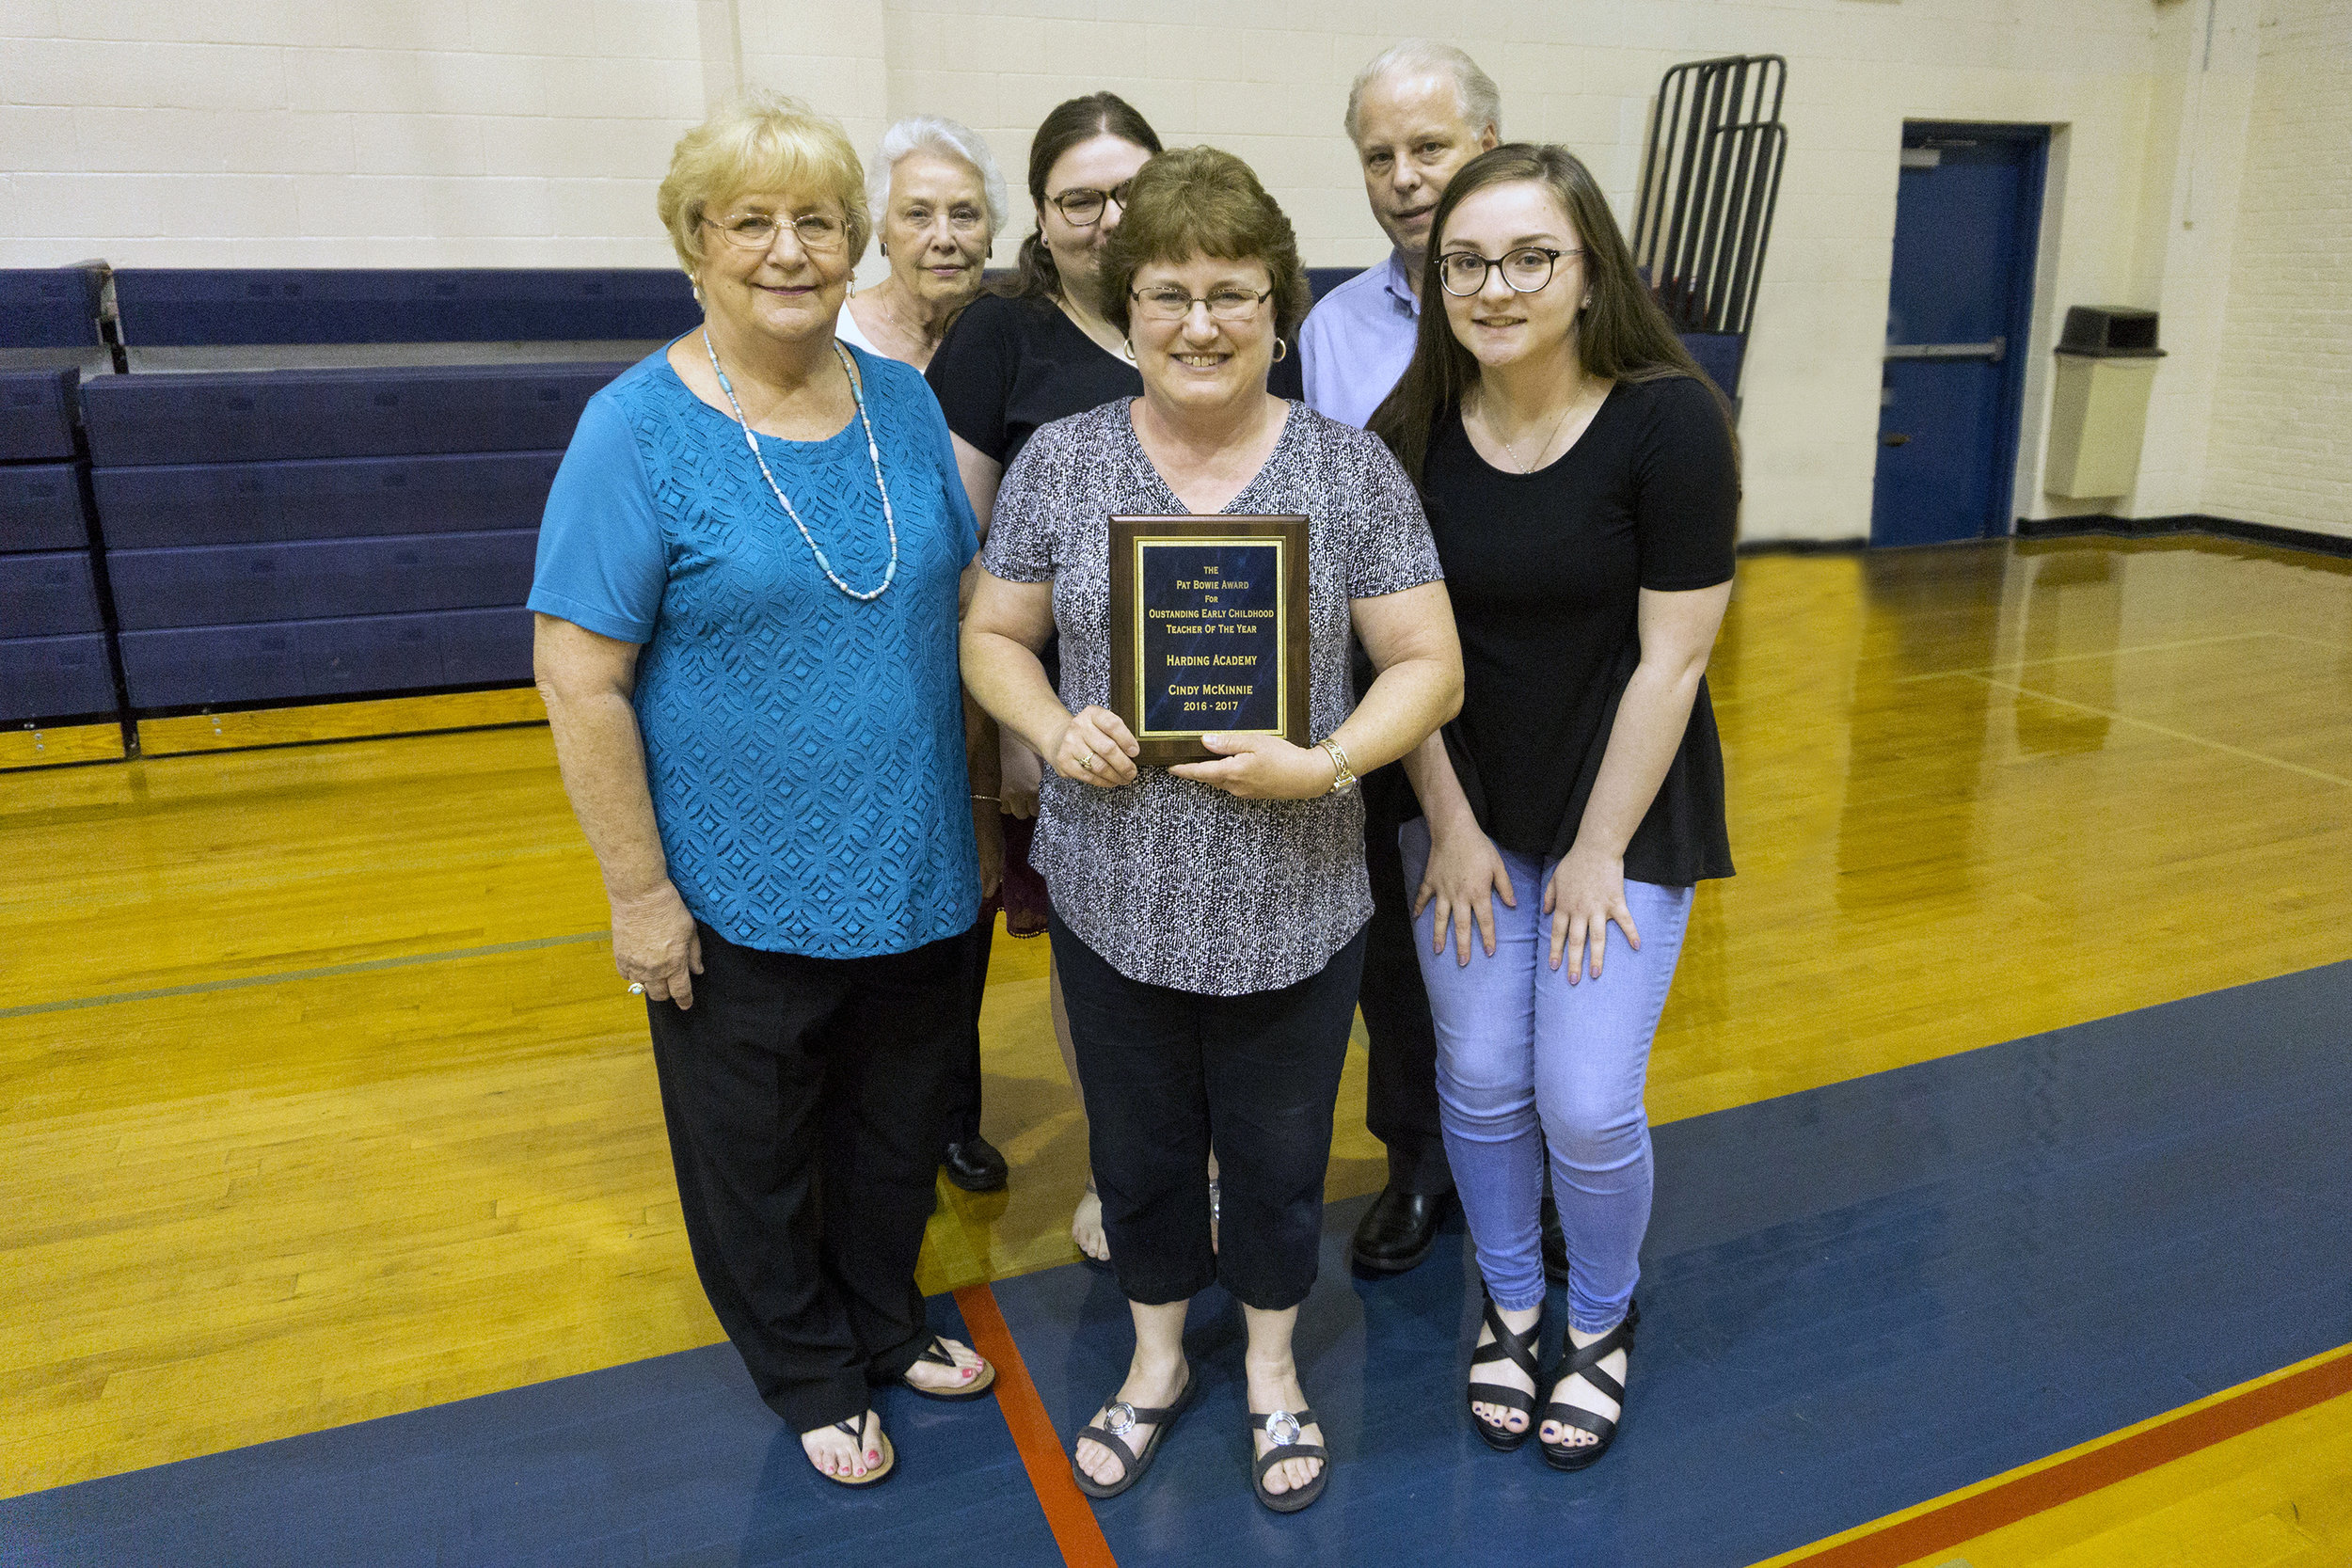 Cindy McKinnie—The Pat Bowie Award for Outstanding Early Childhood Teacher of the Year